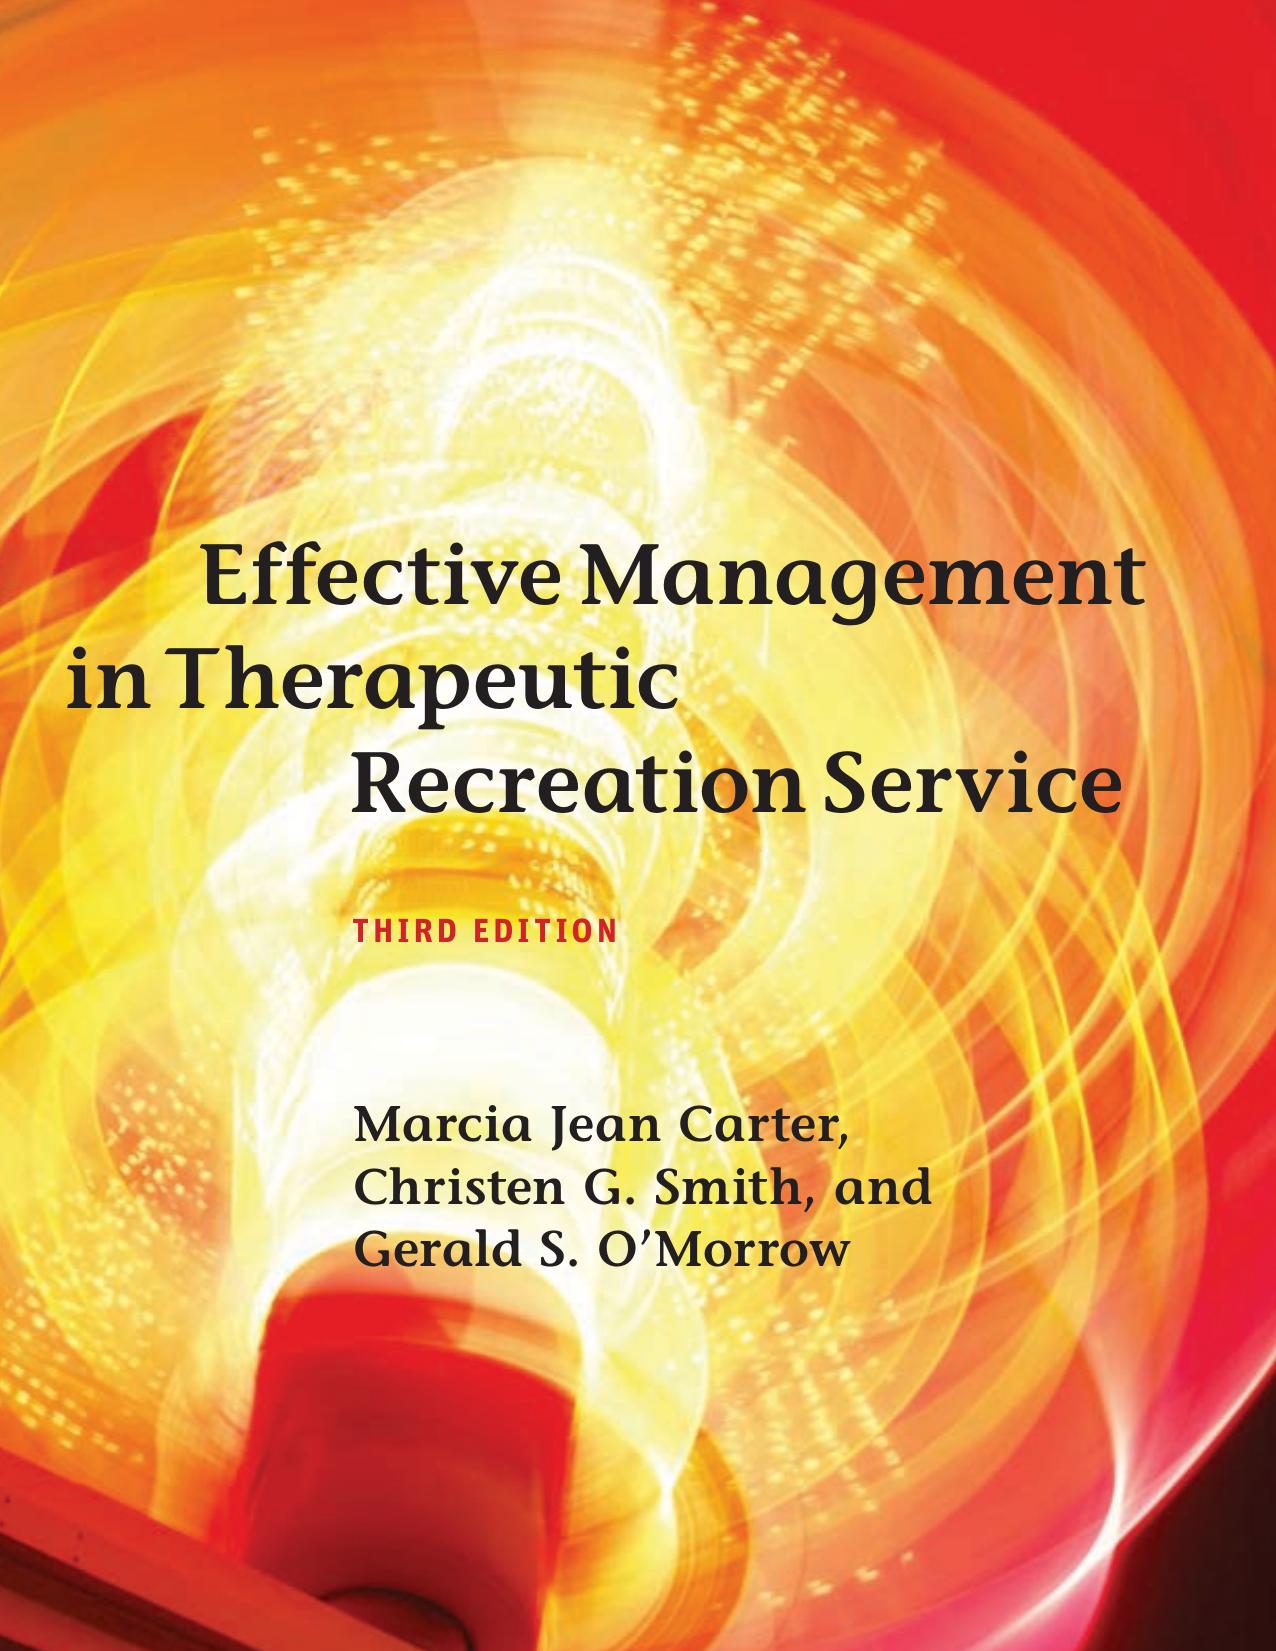 Effective Management in Therapeutic Recreation Service by Marcia Jean Carter; Christen Smith; Gerald O'Morrow